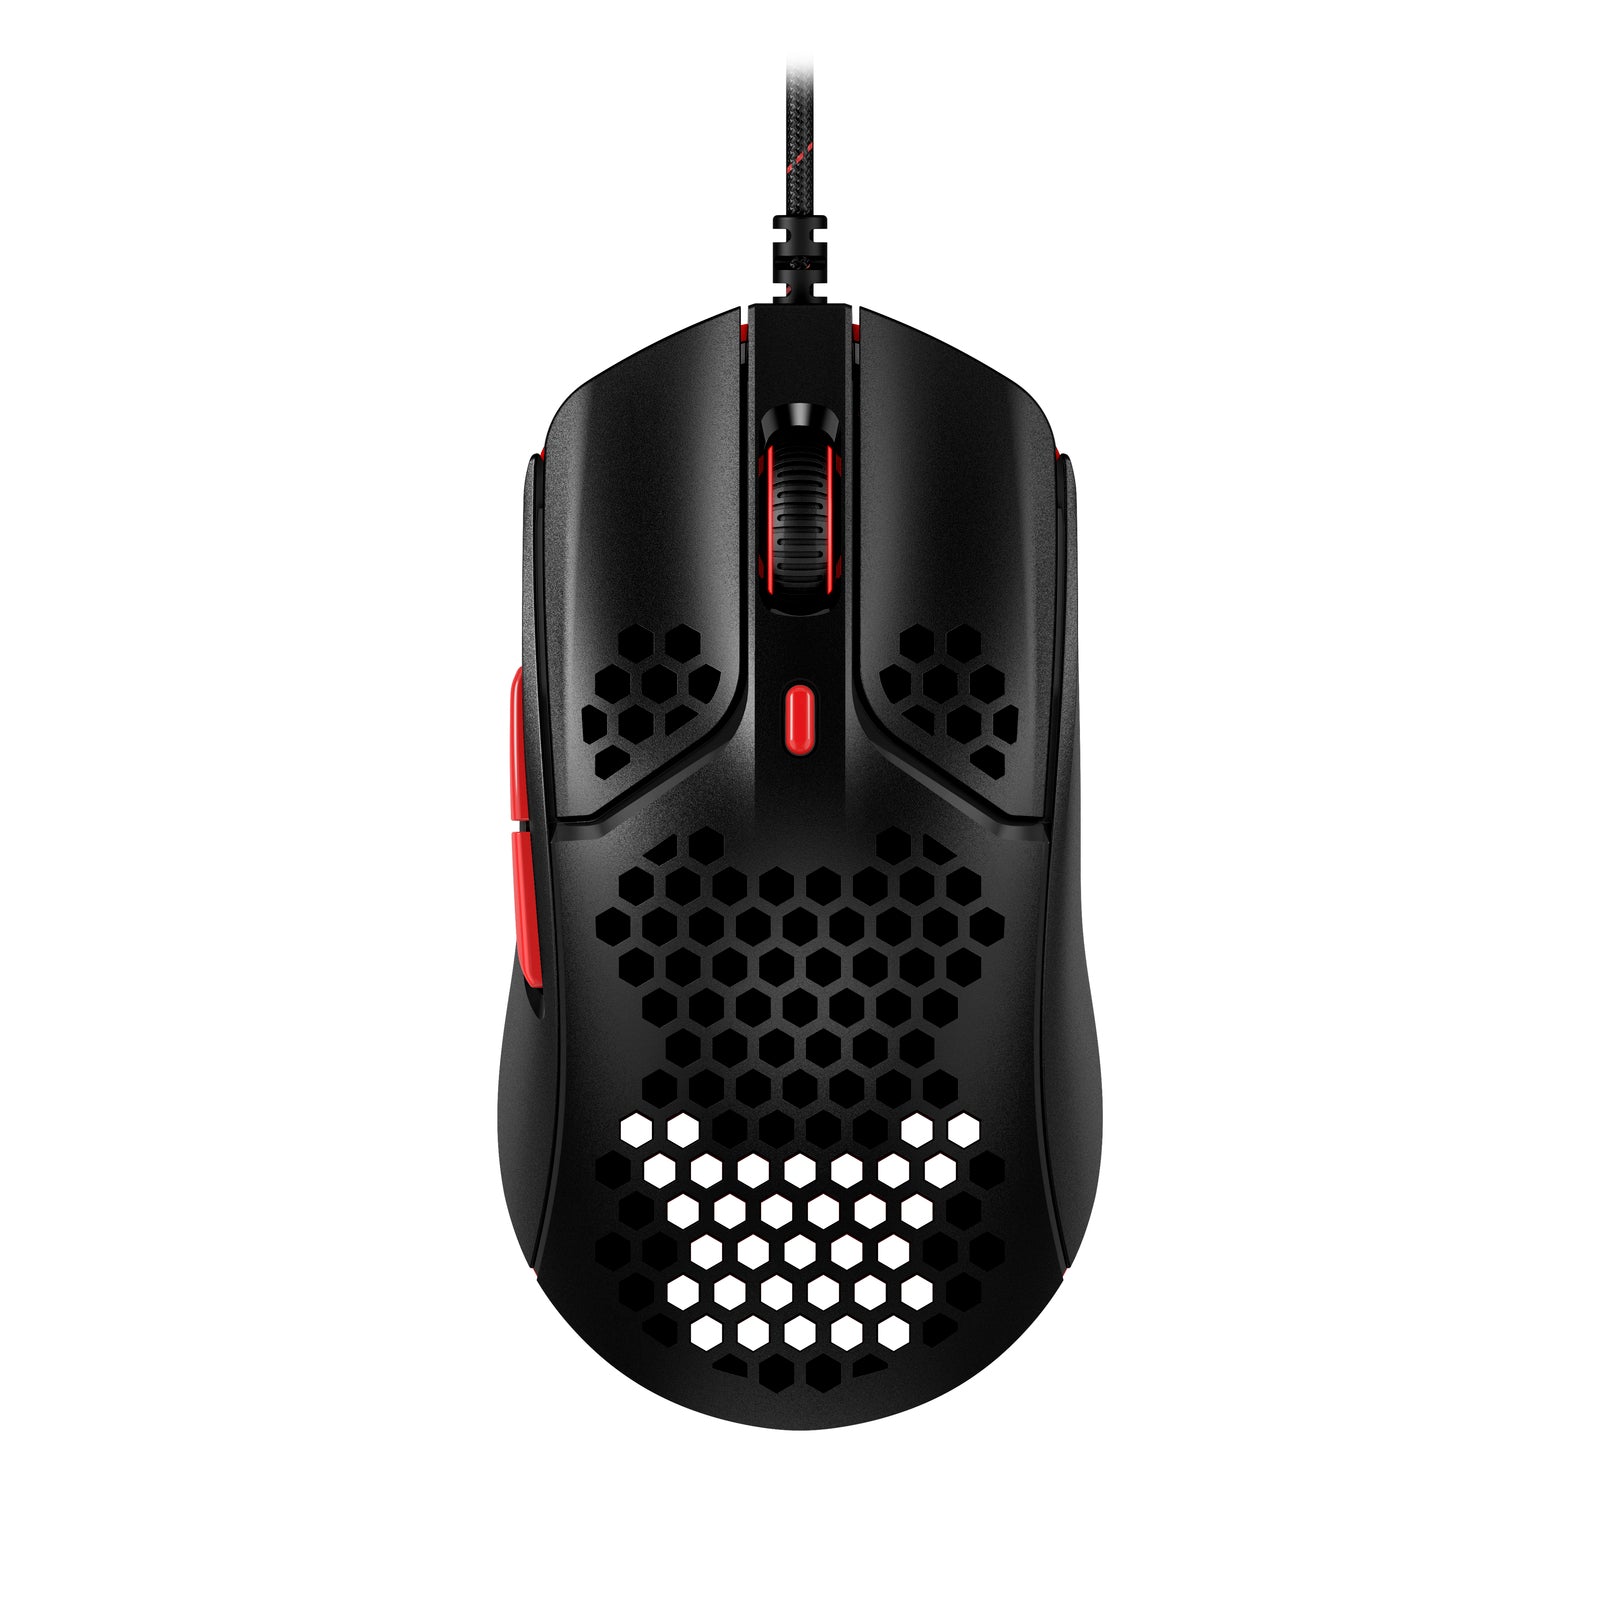 HyperX Pulsefire Haste - Gaming Mouse